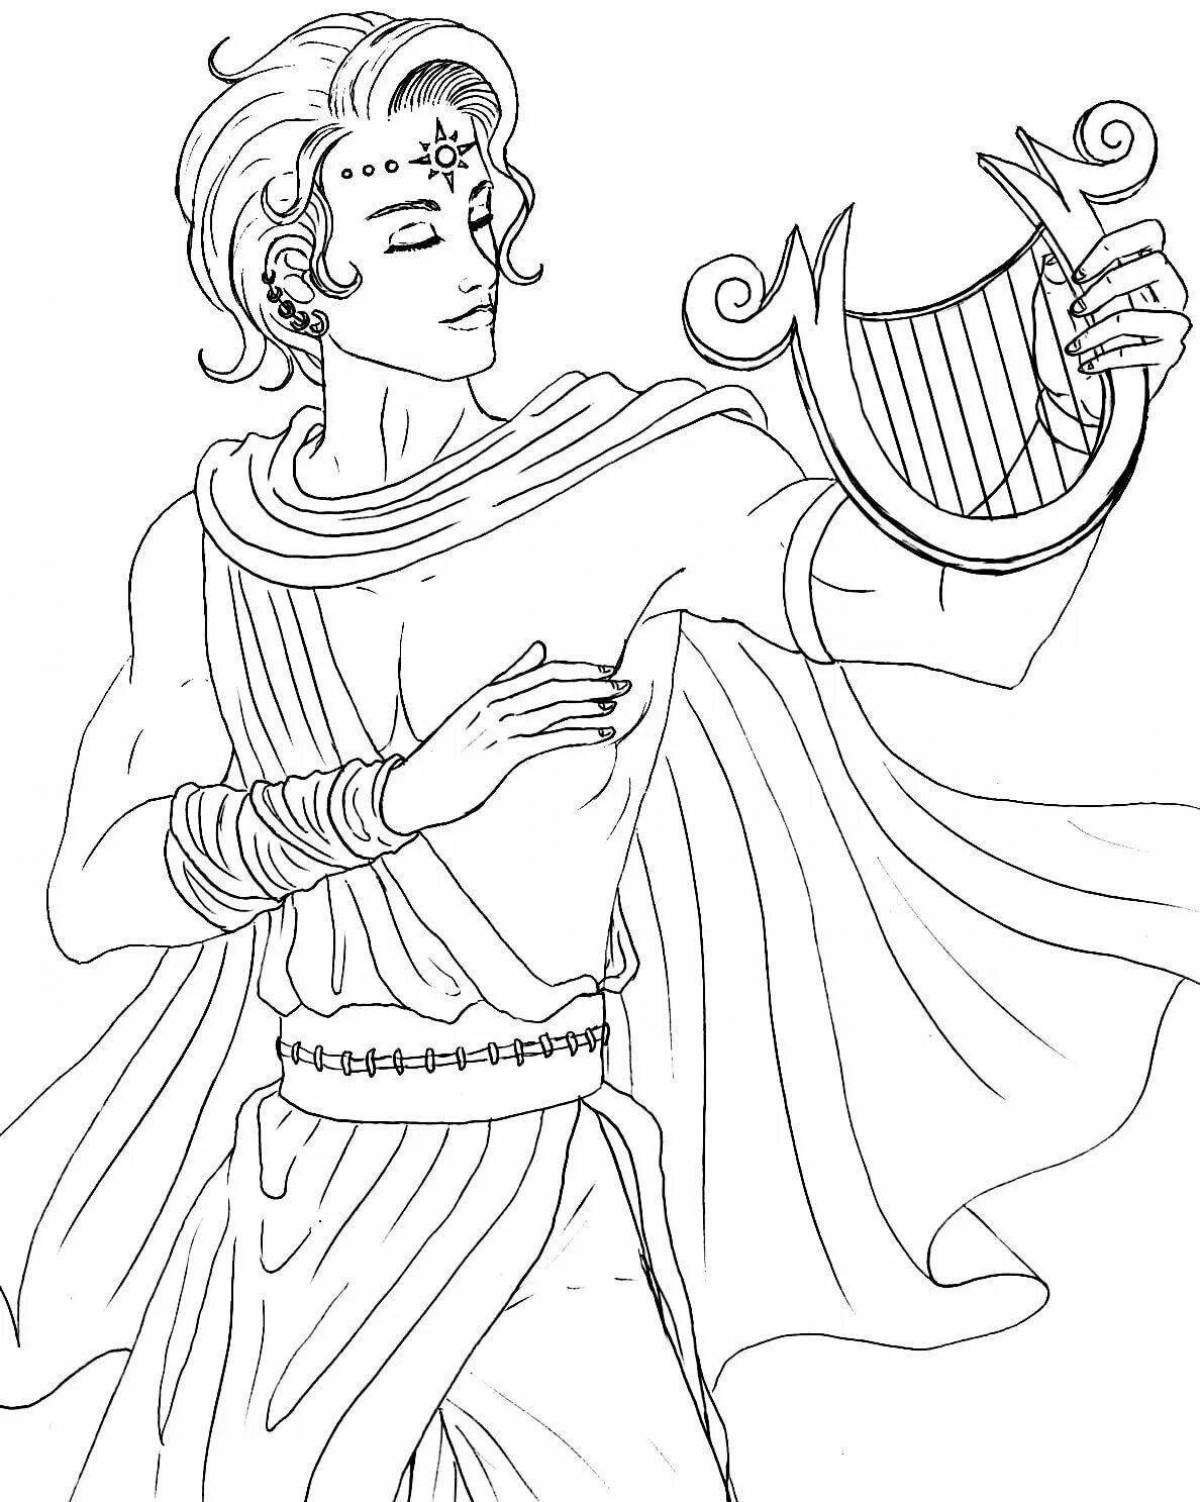 Tempting coloring of ancient Greek myths